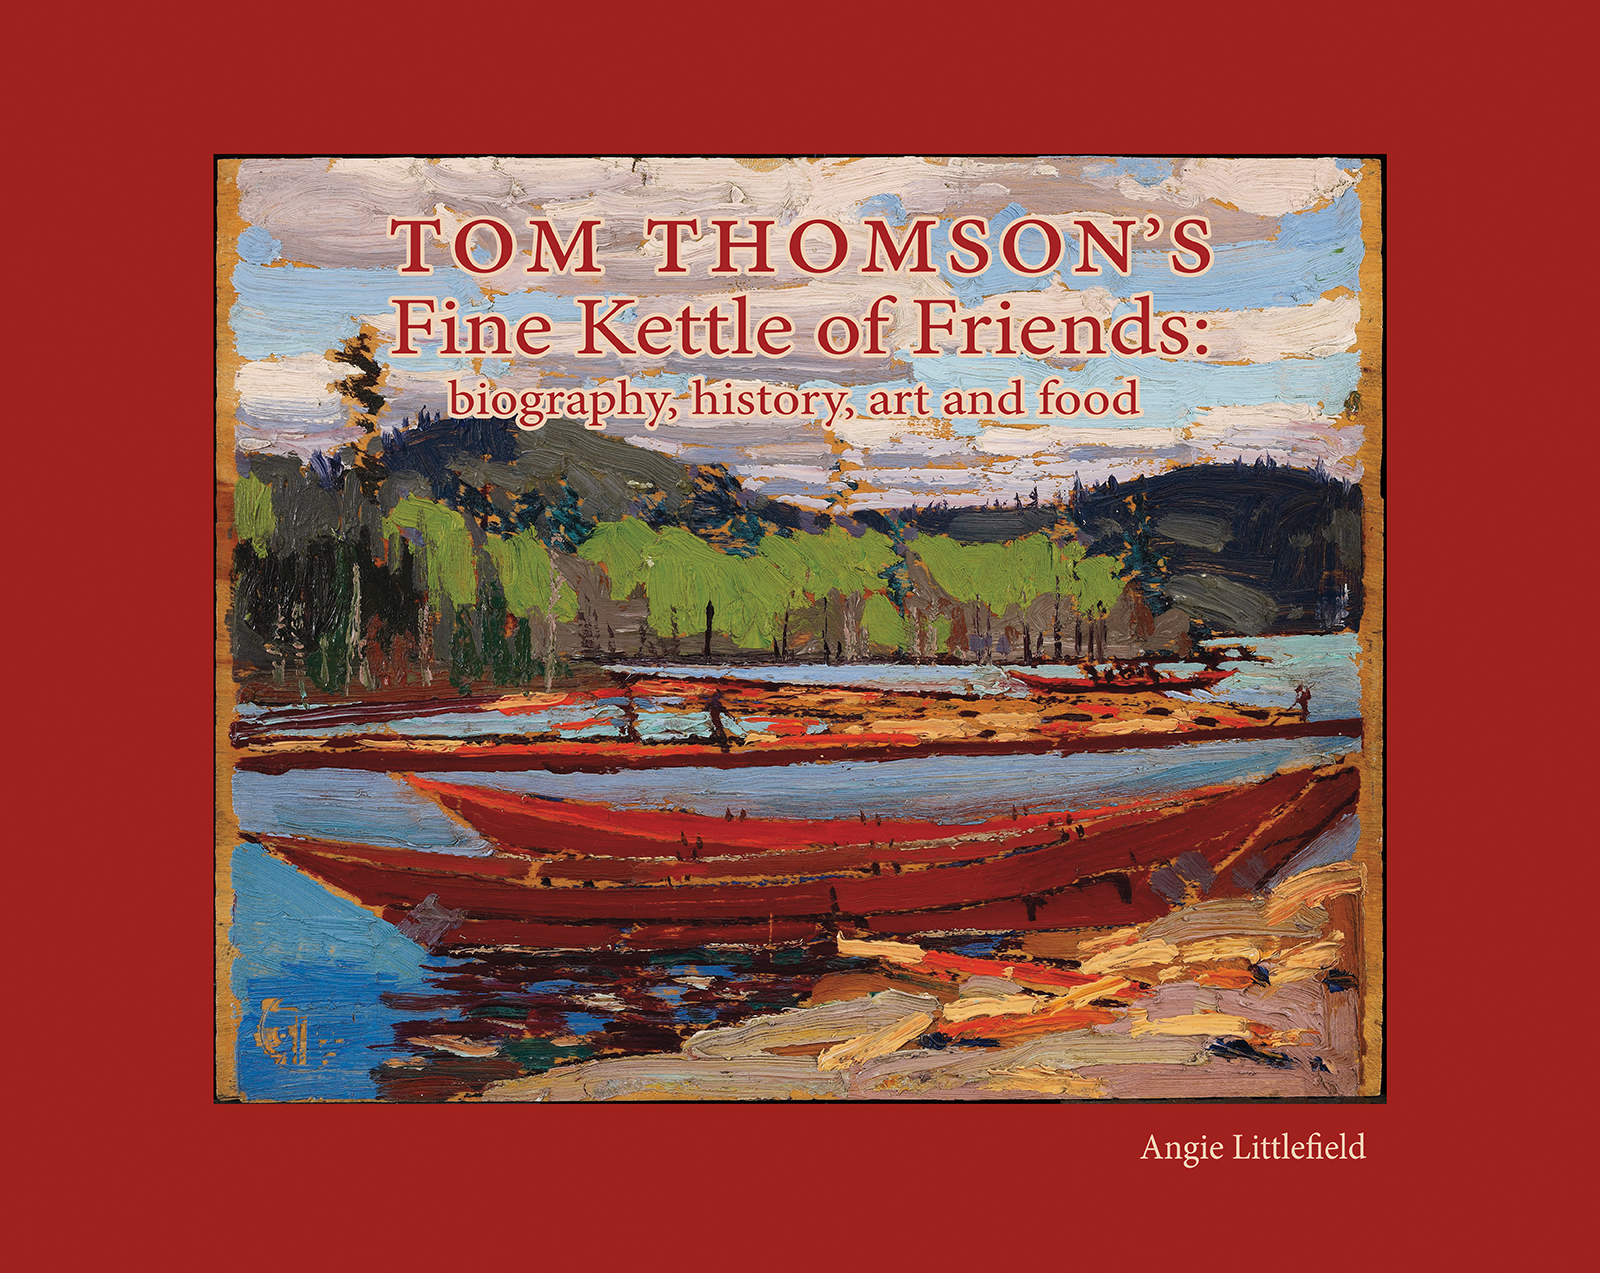 Tom Thomson’s Fine Kettle of Friends: biography, history, art and food